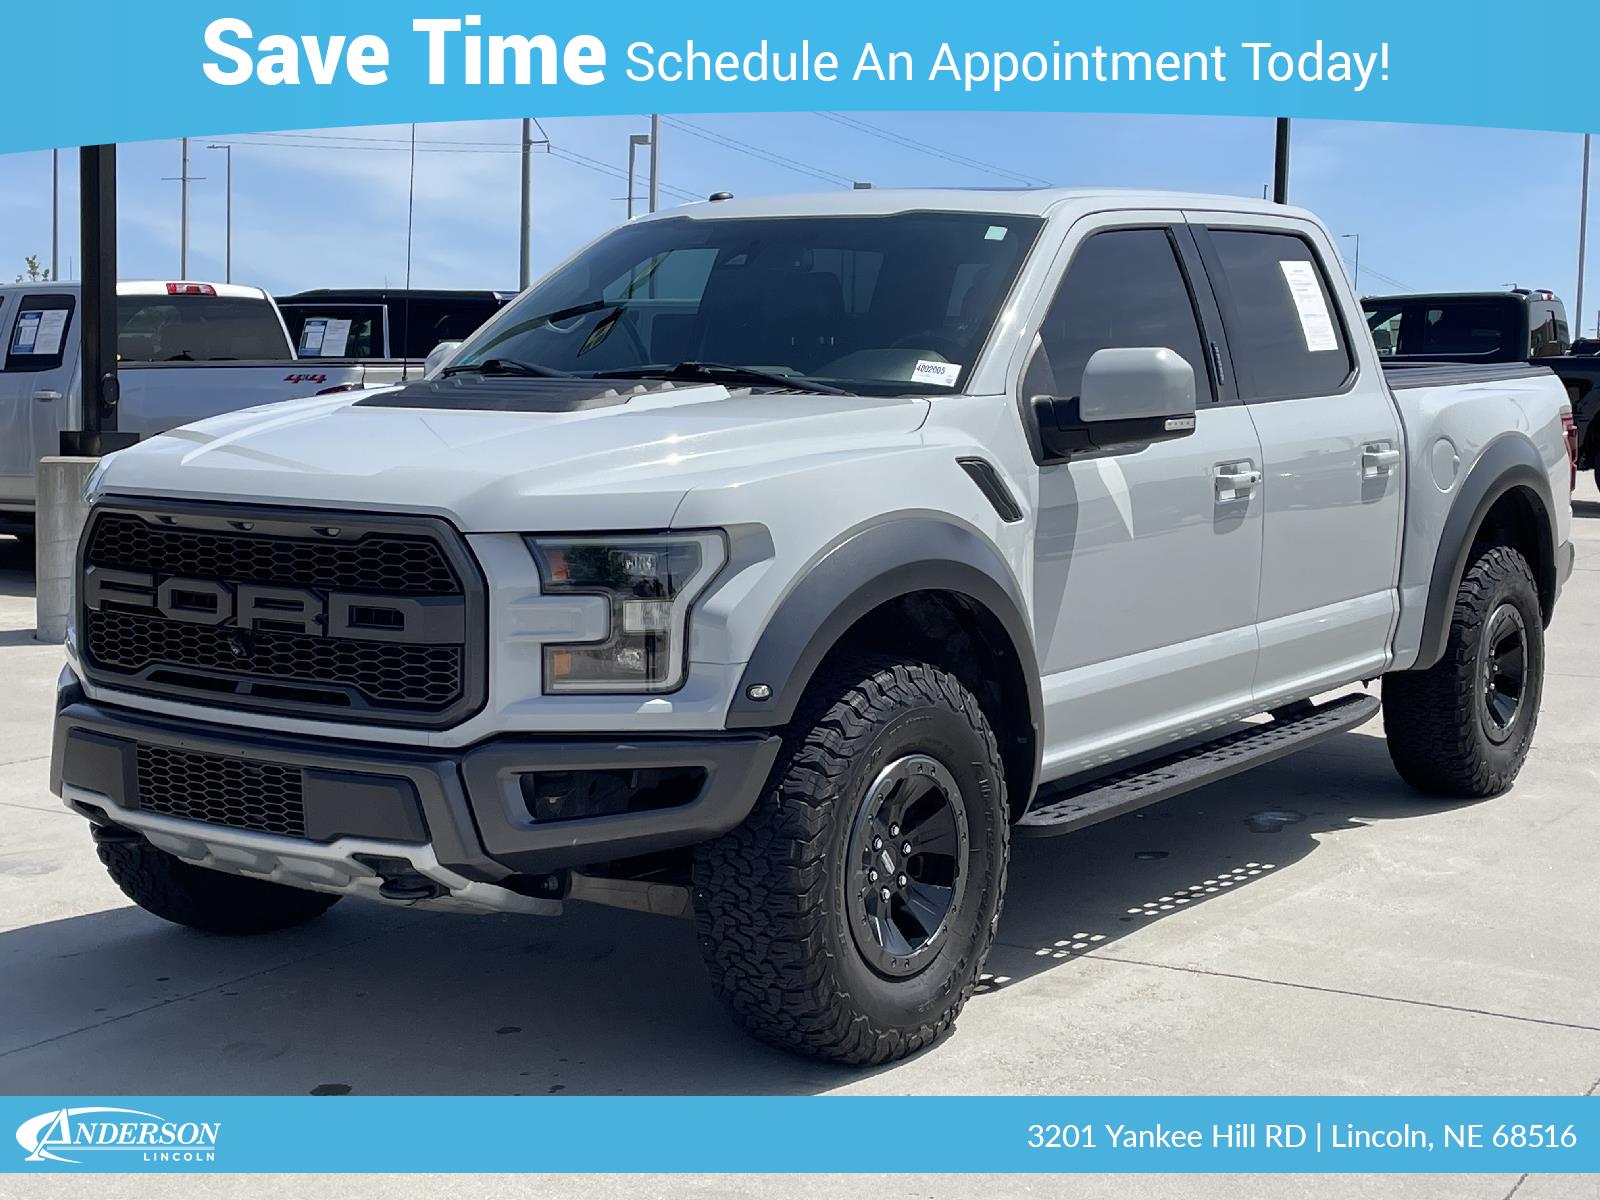 Used 2017 Ford F-150 Raptor Stock: 4002005